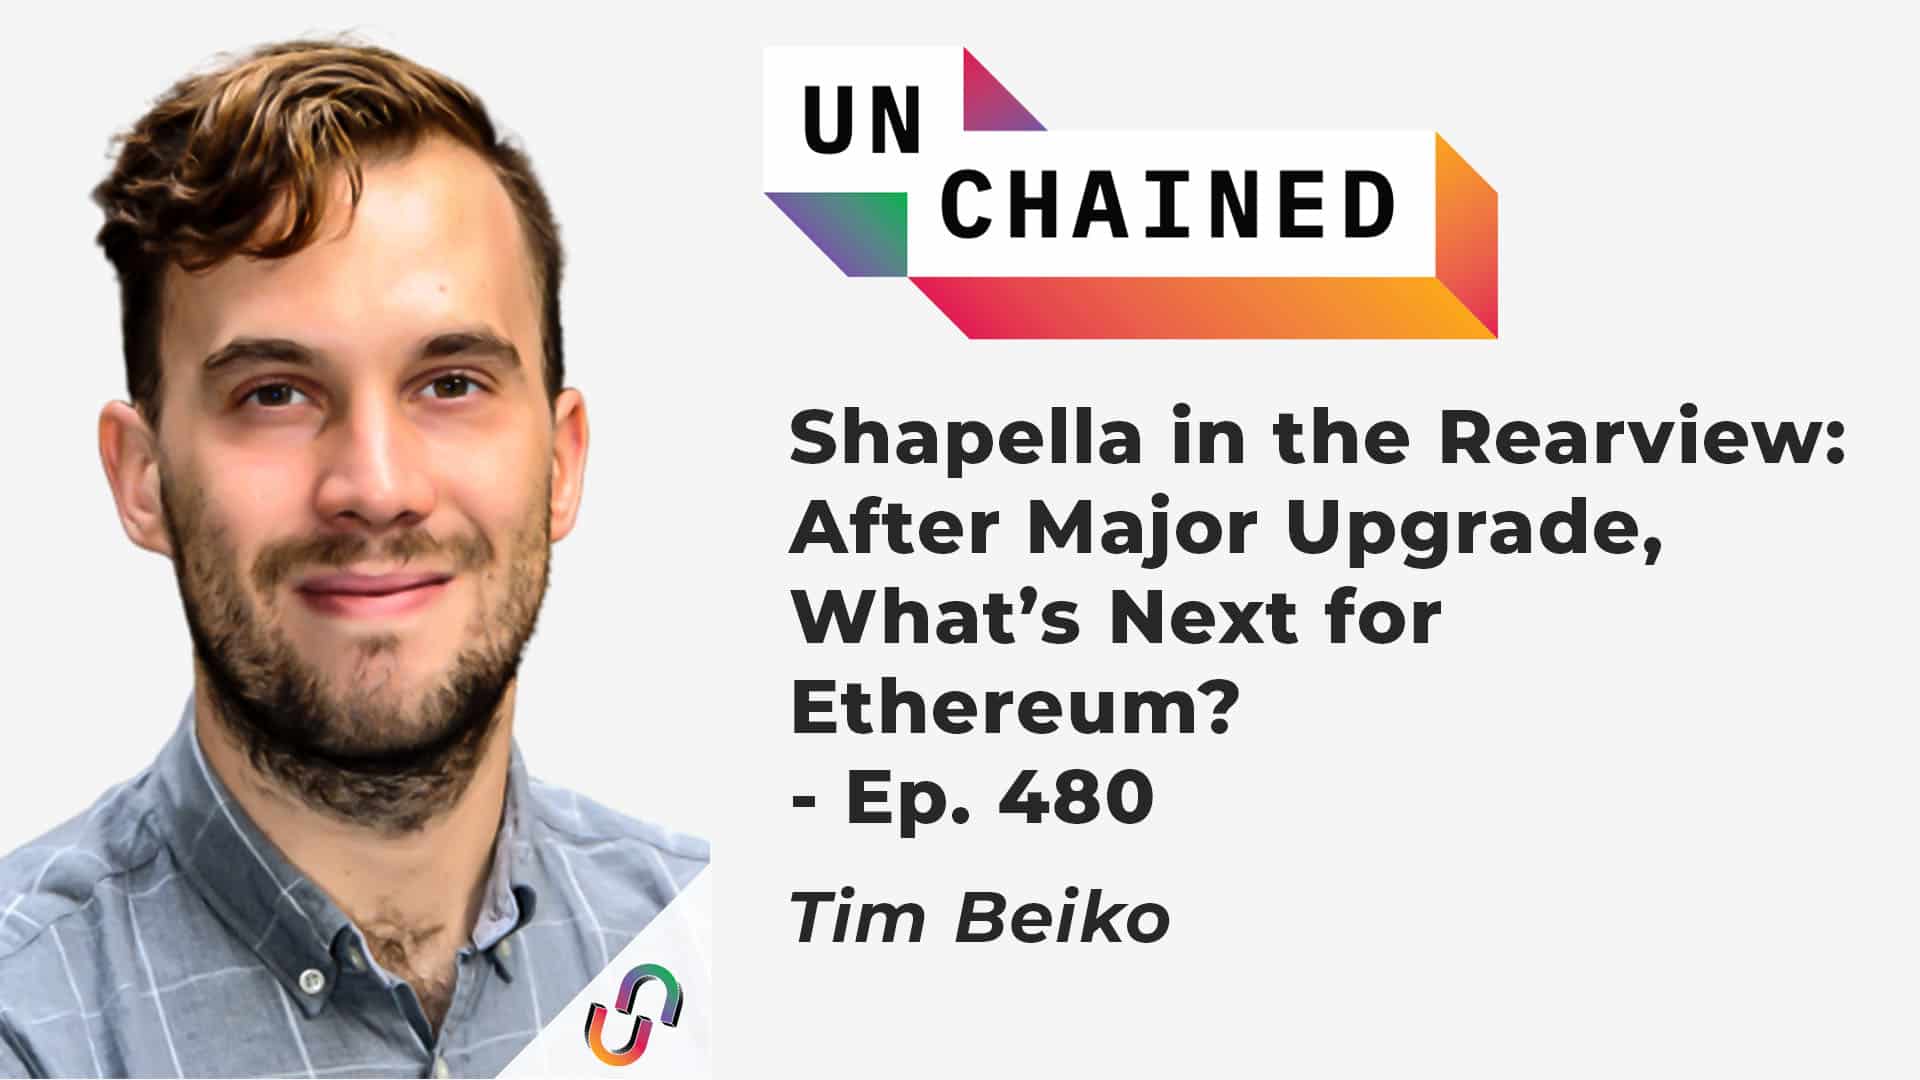 Shapella in the Rearview: After Major Upgrade, What’s Next for Ethereum? - Ep. 480